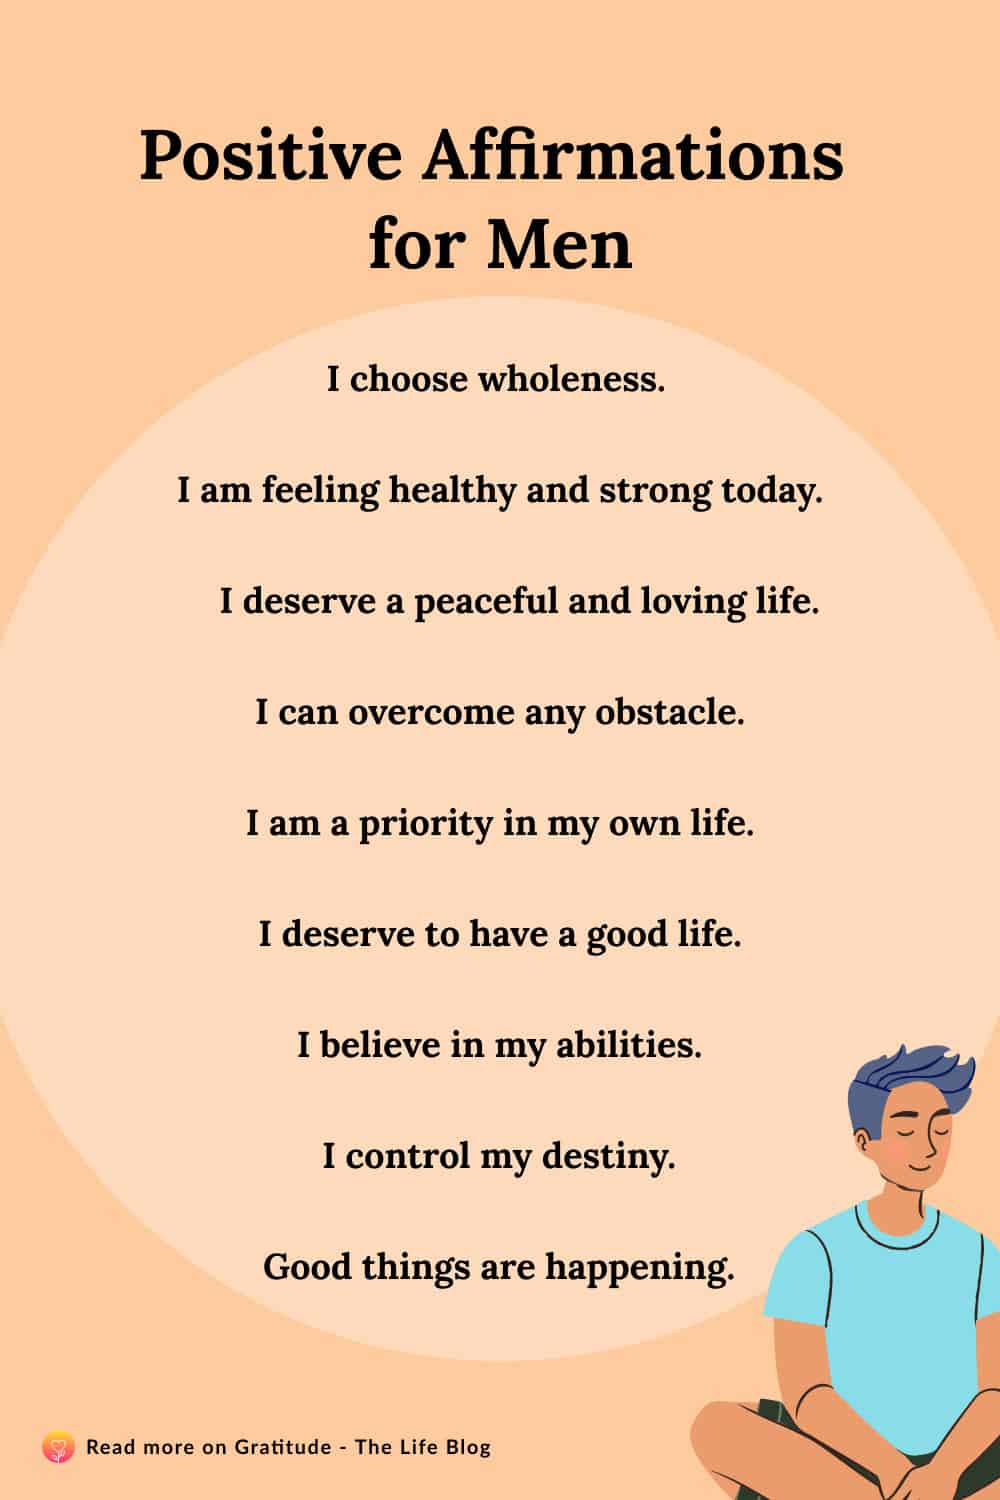 Image with list of positive affirmations for men